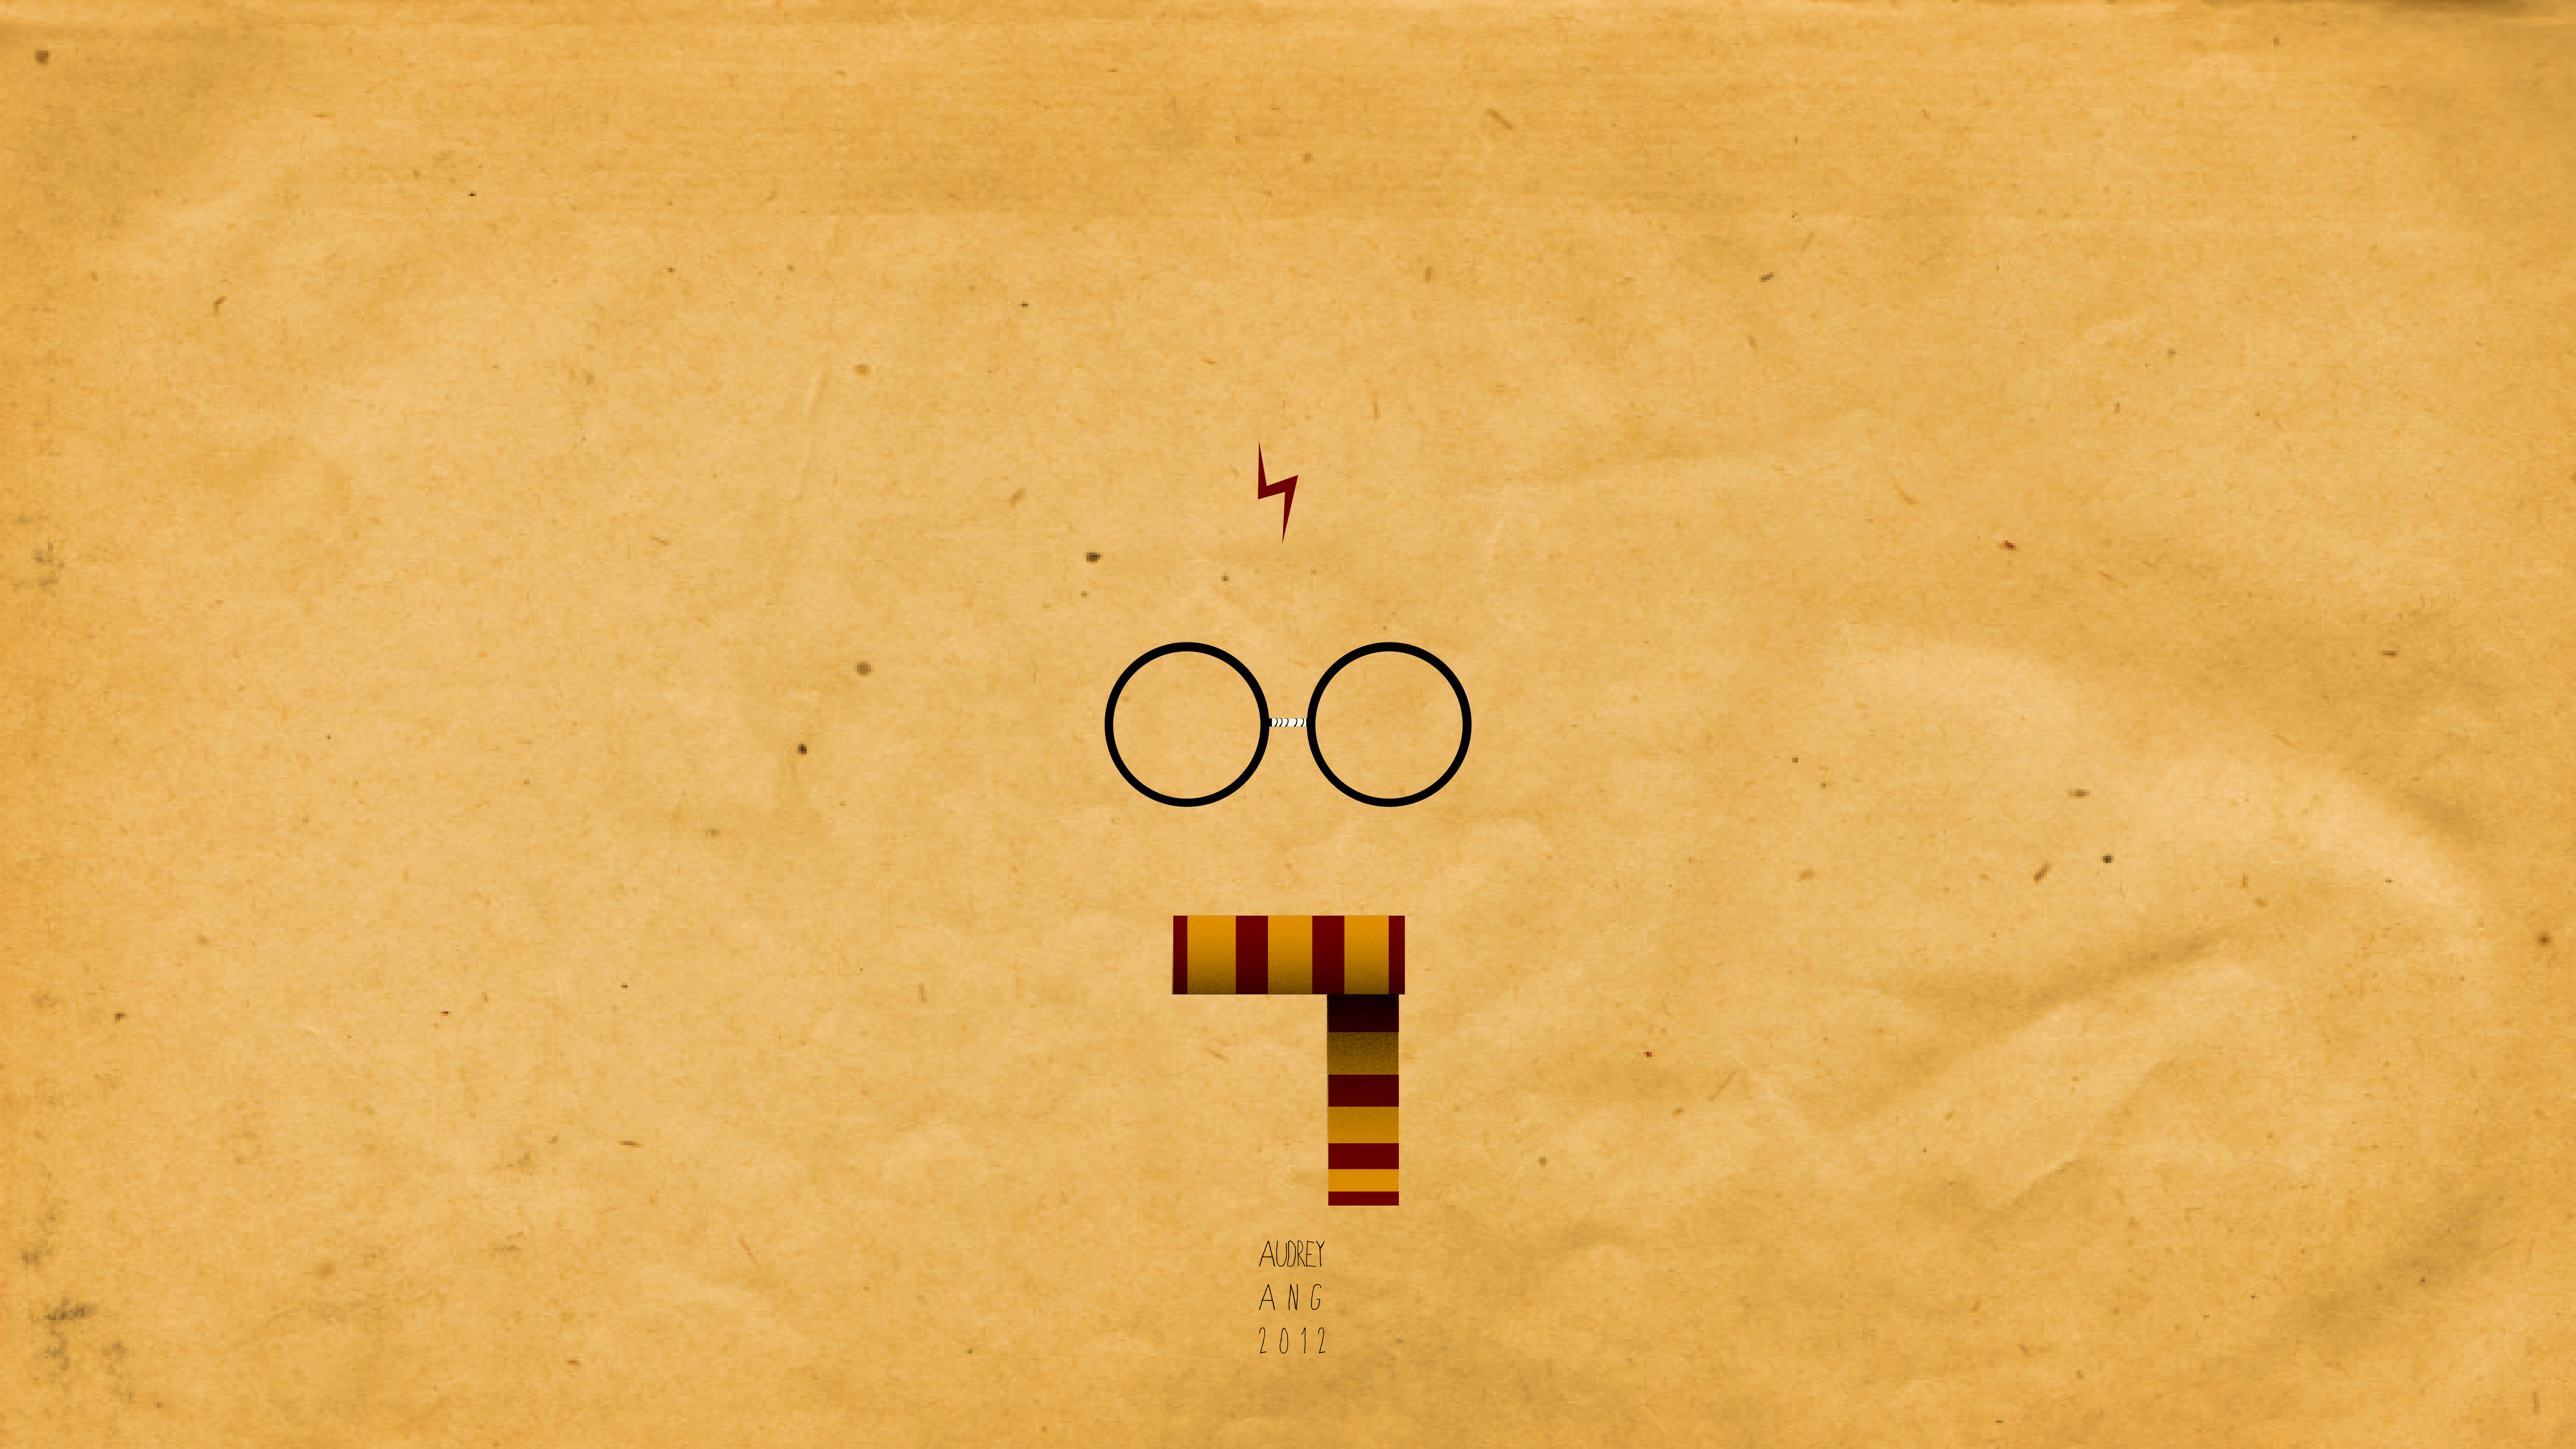 Cool Potter Related Quotes Wallpapers. QuotesGram